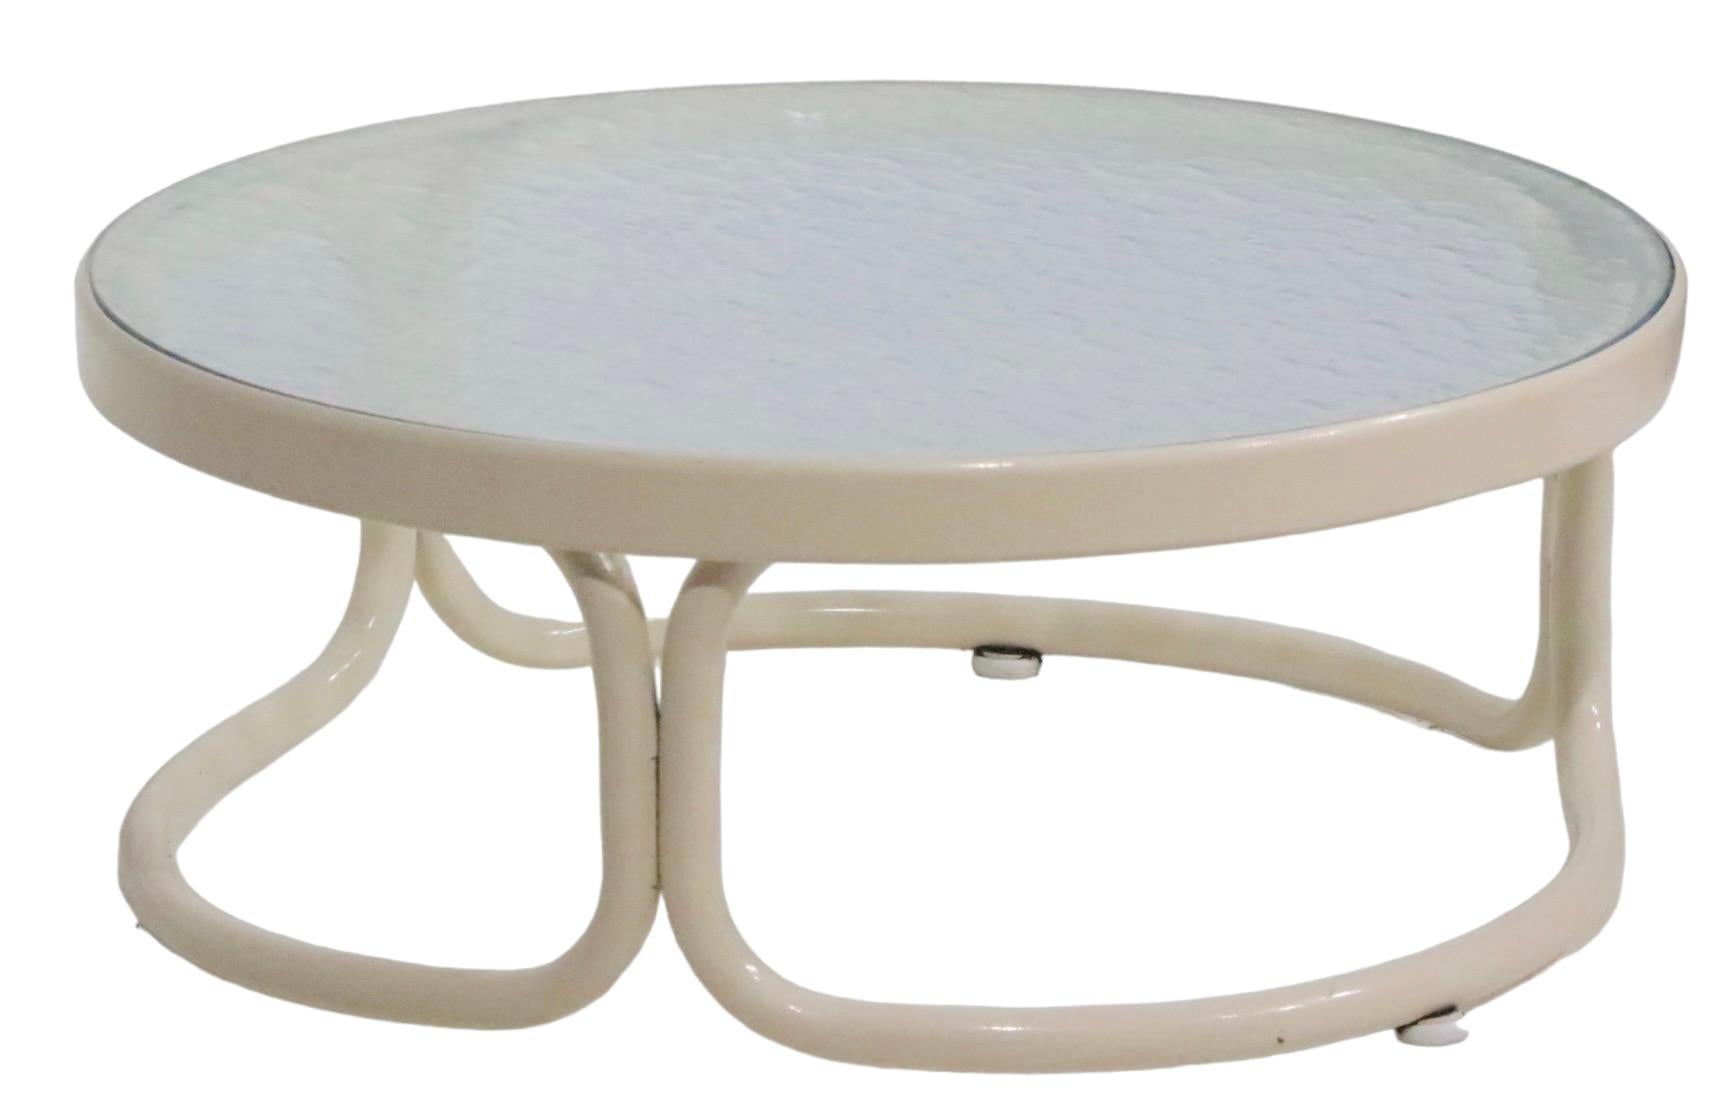 Stylish, chic, and voguish vintage patio,  poolside garden side table, having a tubular aluminum frame, with a textured glass top. The table is in excellent original clean and ready to use condition, showing only light cosmetic wear, normal and